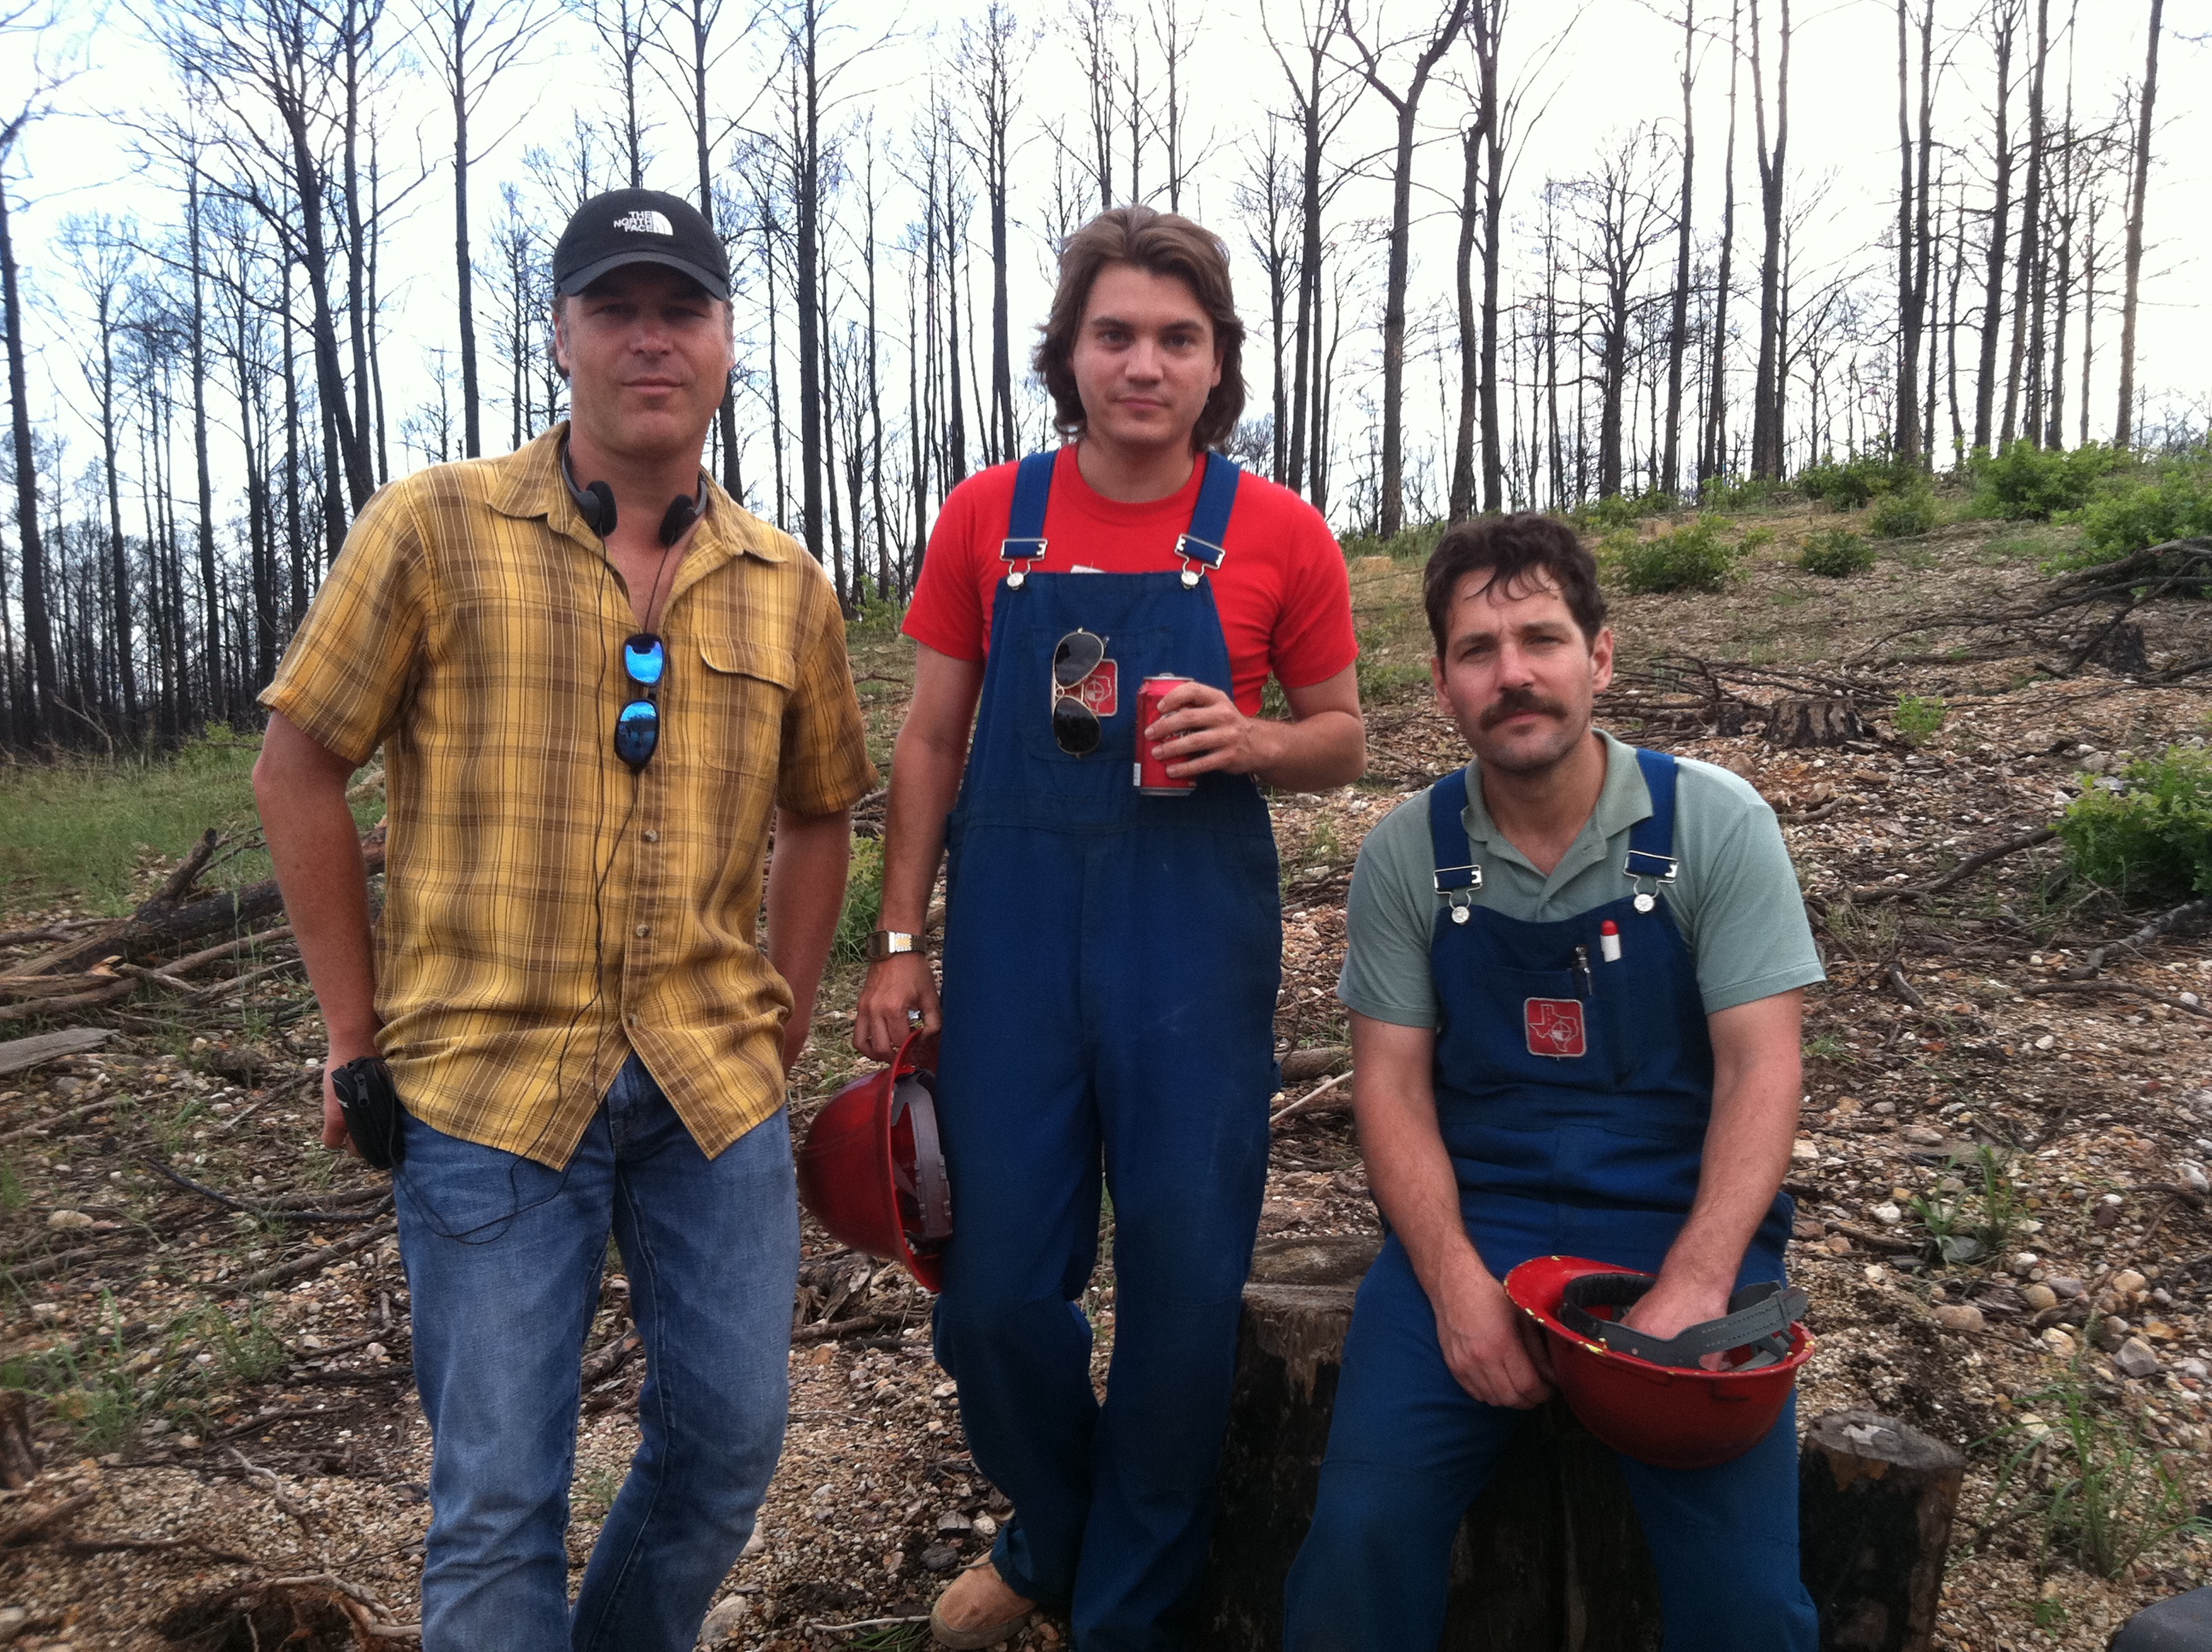 Producer Todd Labarowski, Actor Emile Hirsch, and Actor Paul Rudd on the set of 'Prince Avalanche' on May 11, 2012 in Bastrop, Texas.